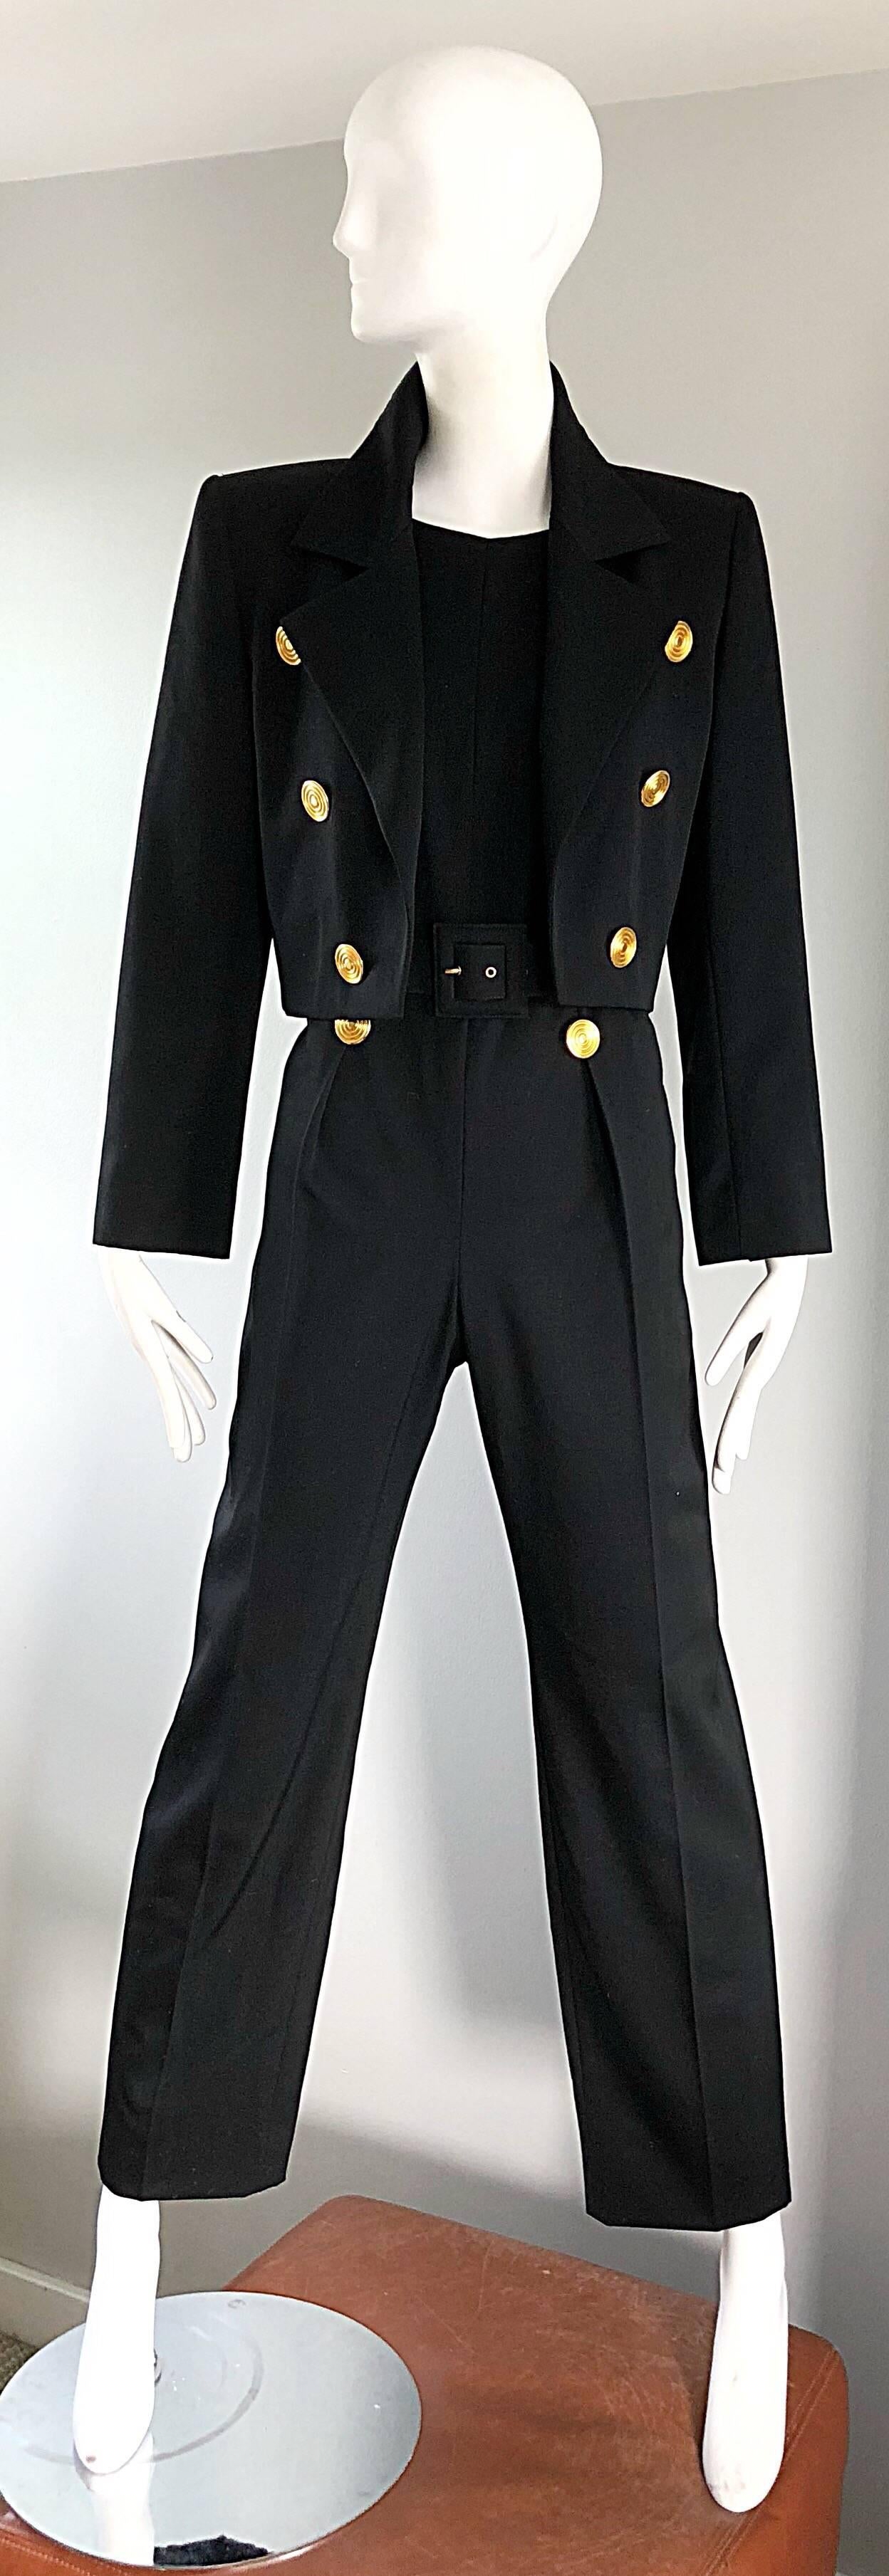 Alexander McQueen for Givenchy Couture Vintage Black Jumpsuit + Cropped Jacket  4